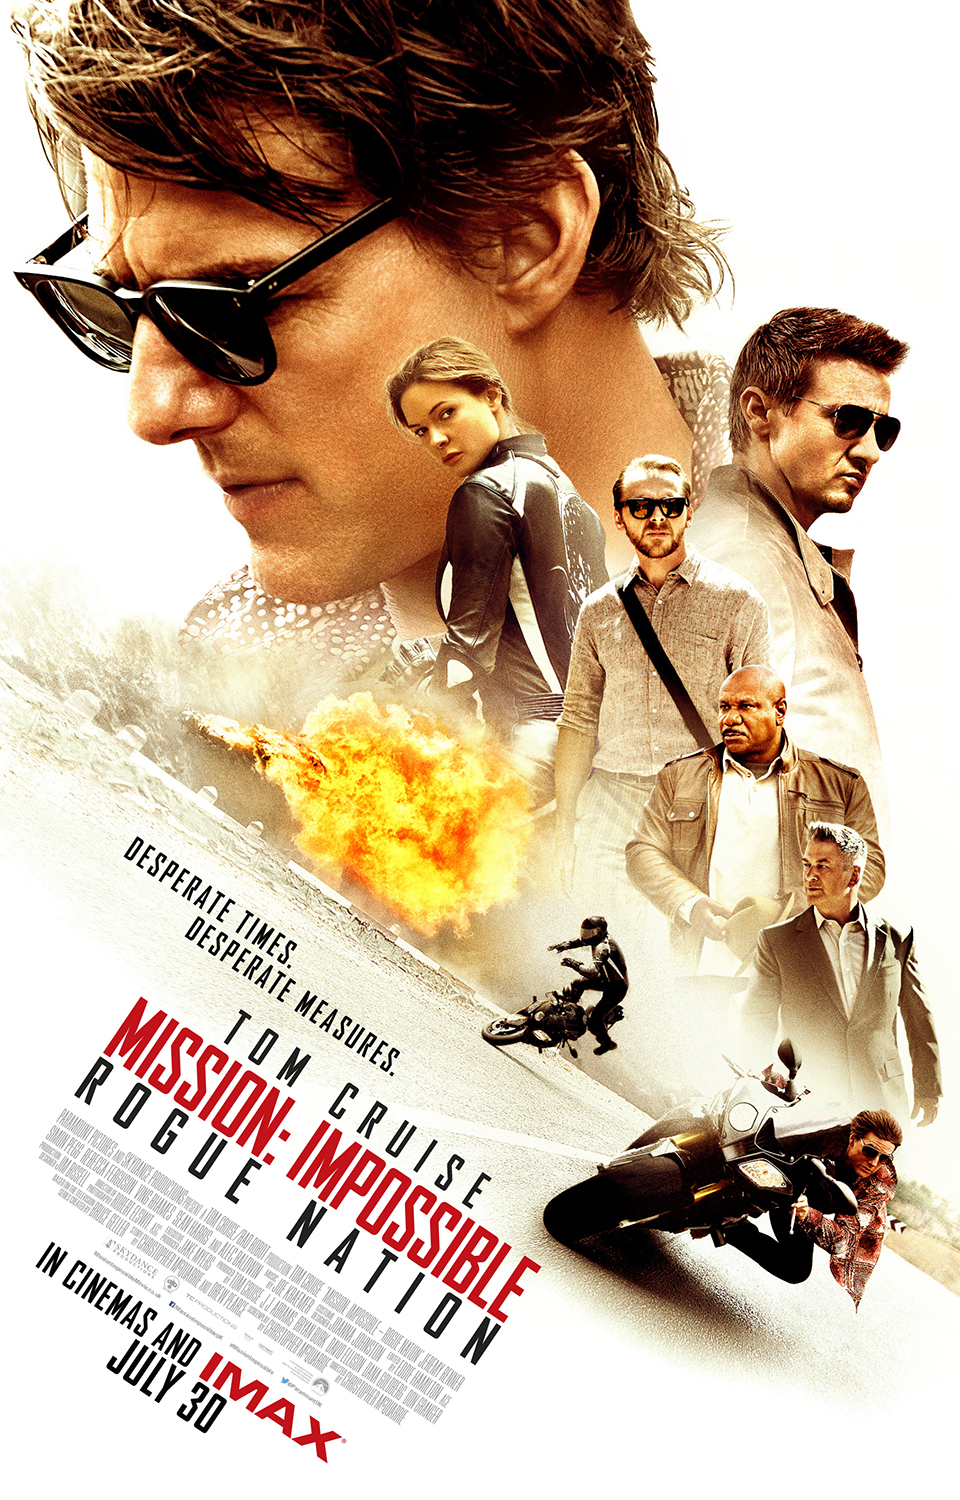 New releases include Mission: Impossible - Rogue Nation, Vacation and more